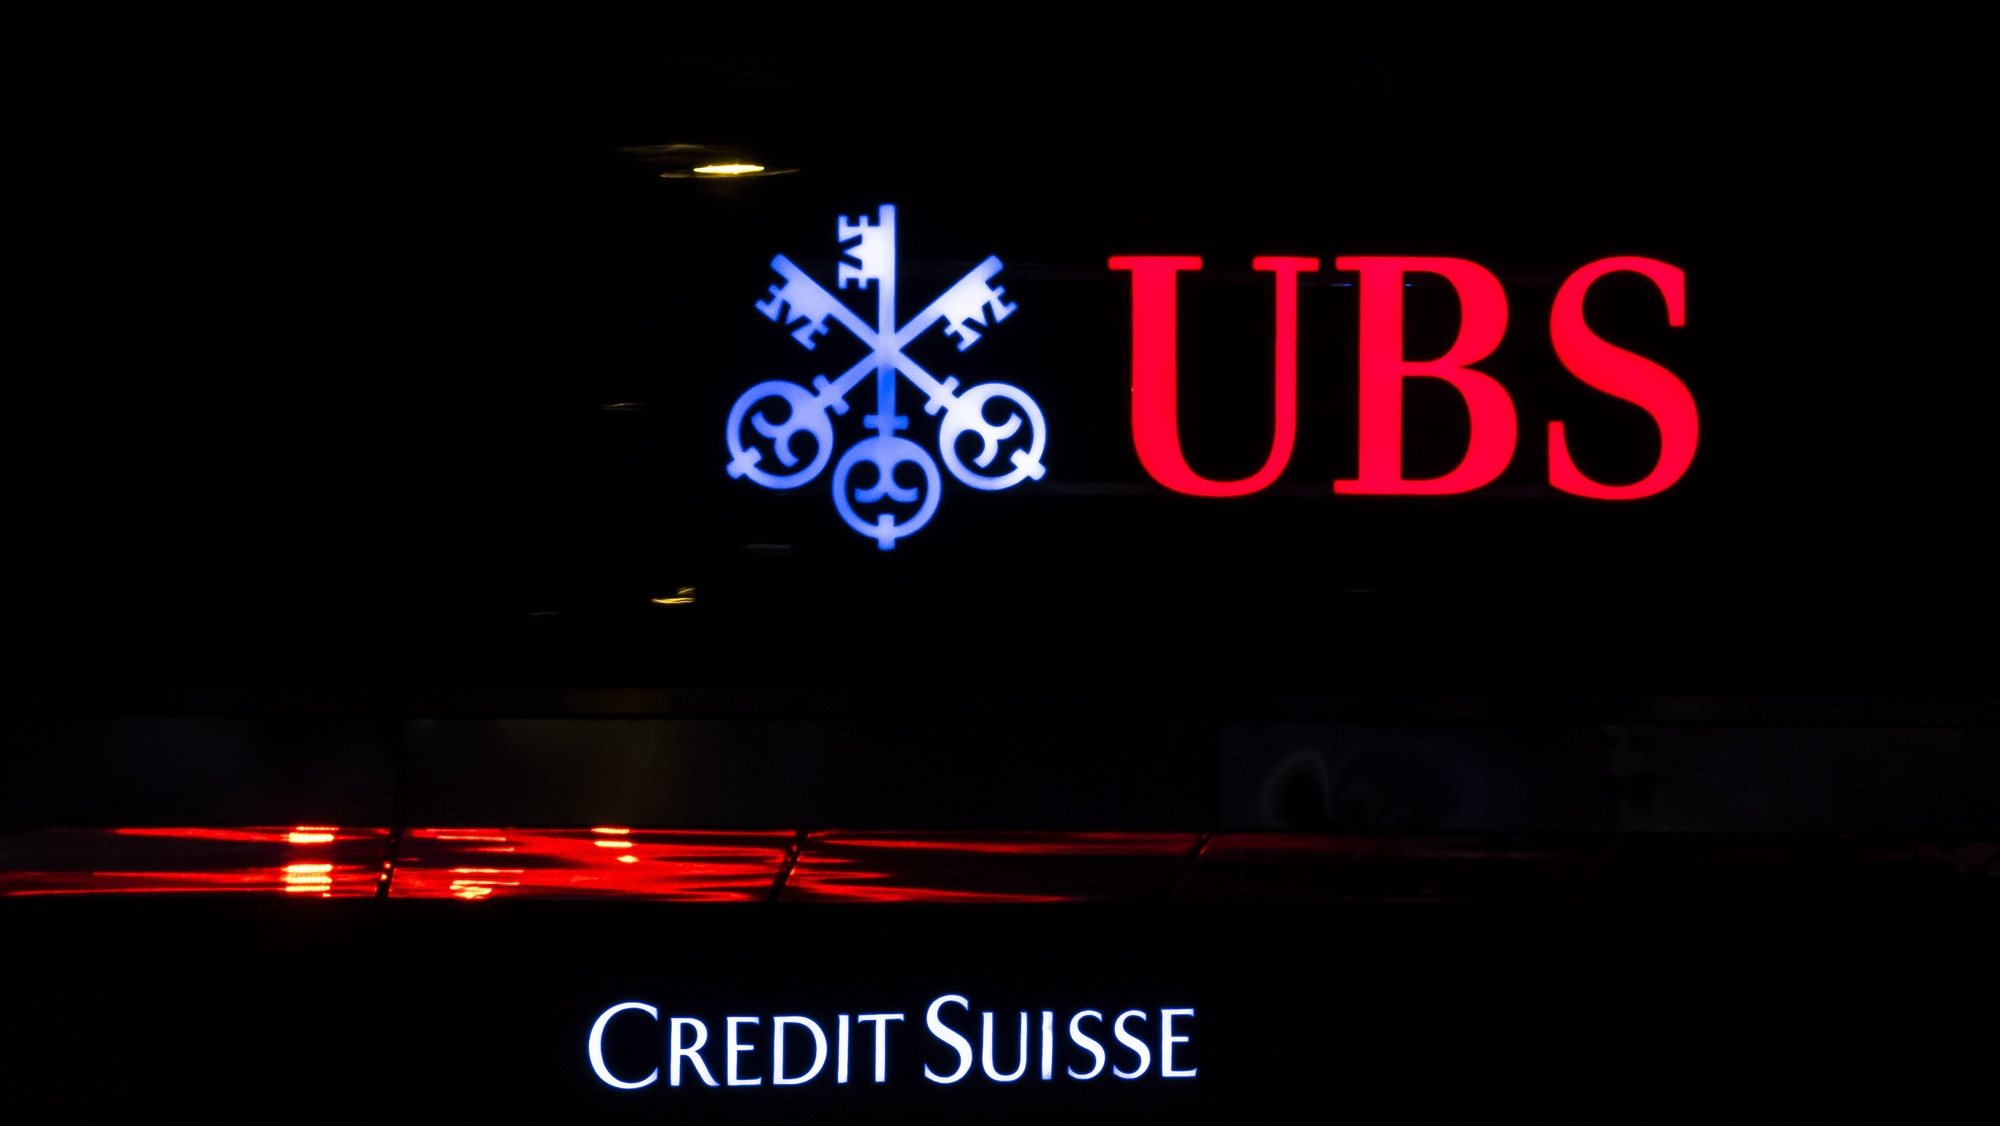 epa10529298 The illuminated logos of the Swiss banks Credit Suisse and UBS are displayed on buildings in Zurich, Switzerland, 18 March 2023. Shares of Credit Suisse lost more than one-quarter of their value on 15 March, hitting a record low after its biggest shareholder, the Saudi National Bank, told outlets that it would not inject more money into the ailing Swiss bank.  EPA/MICHAEL BUHOLZER